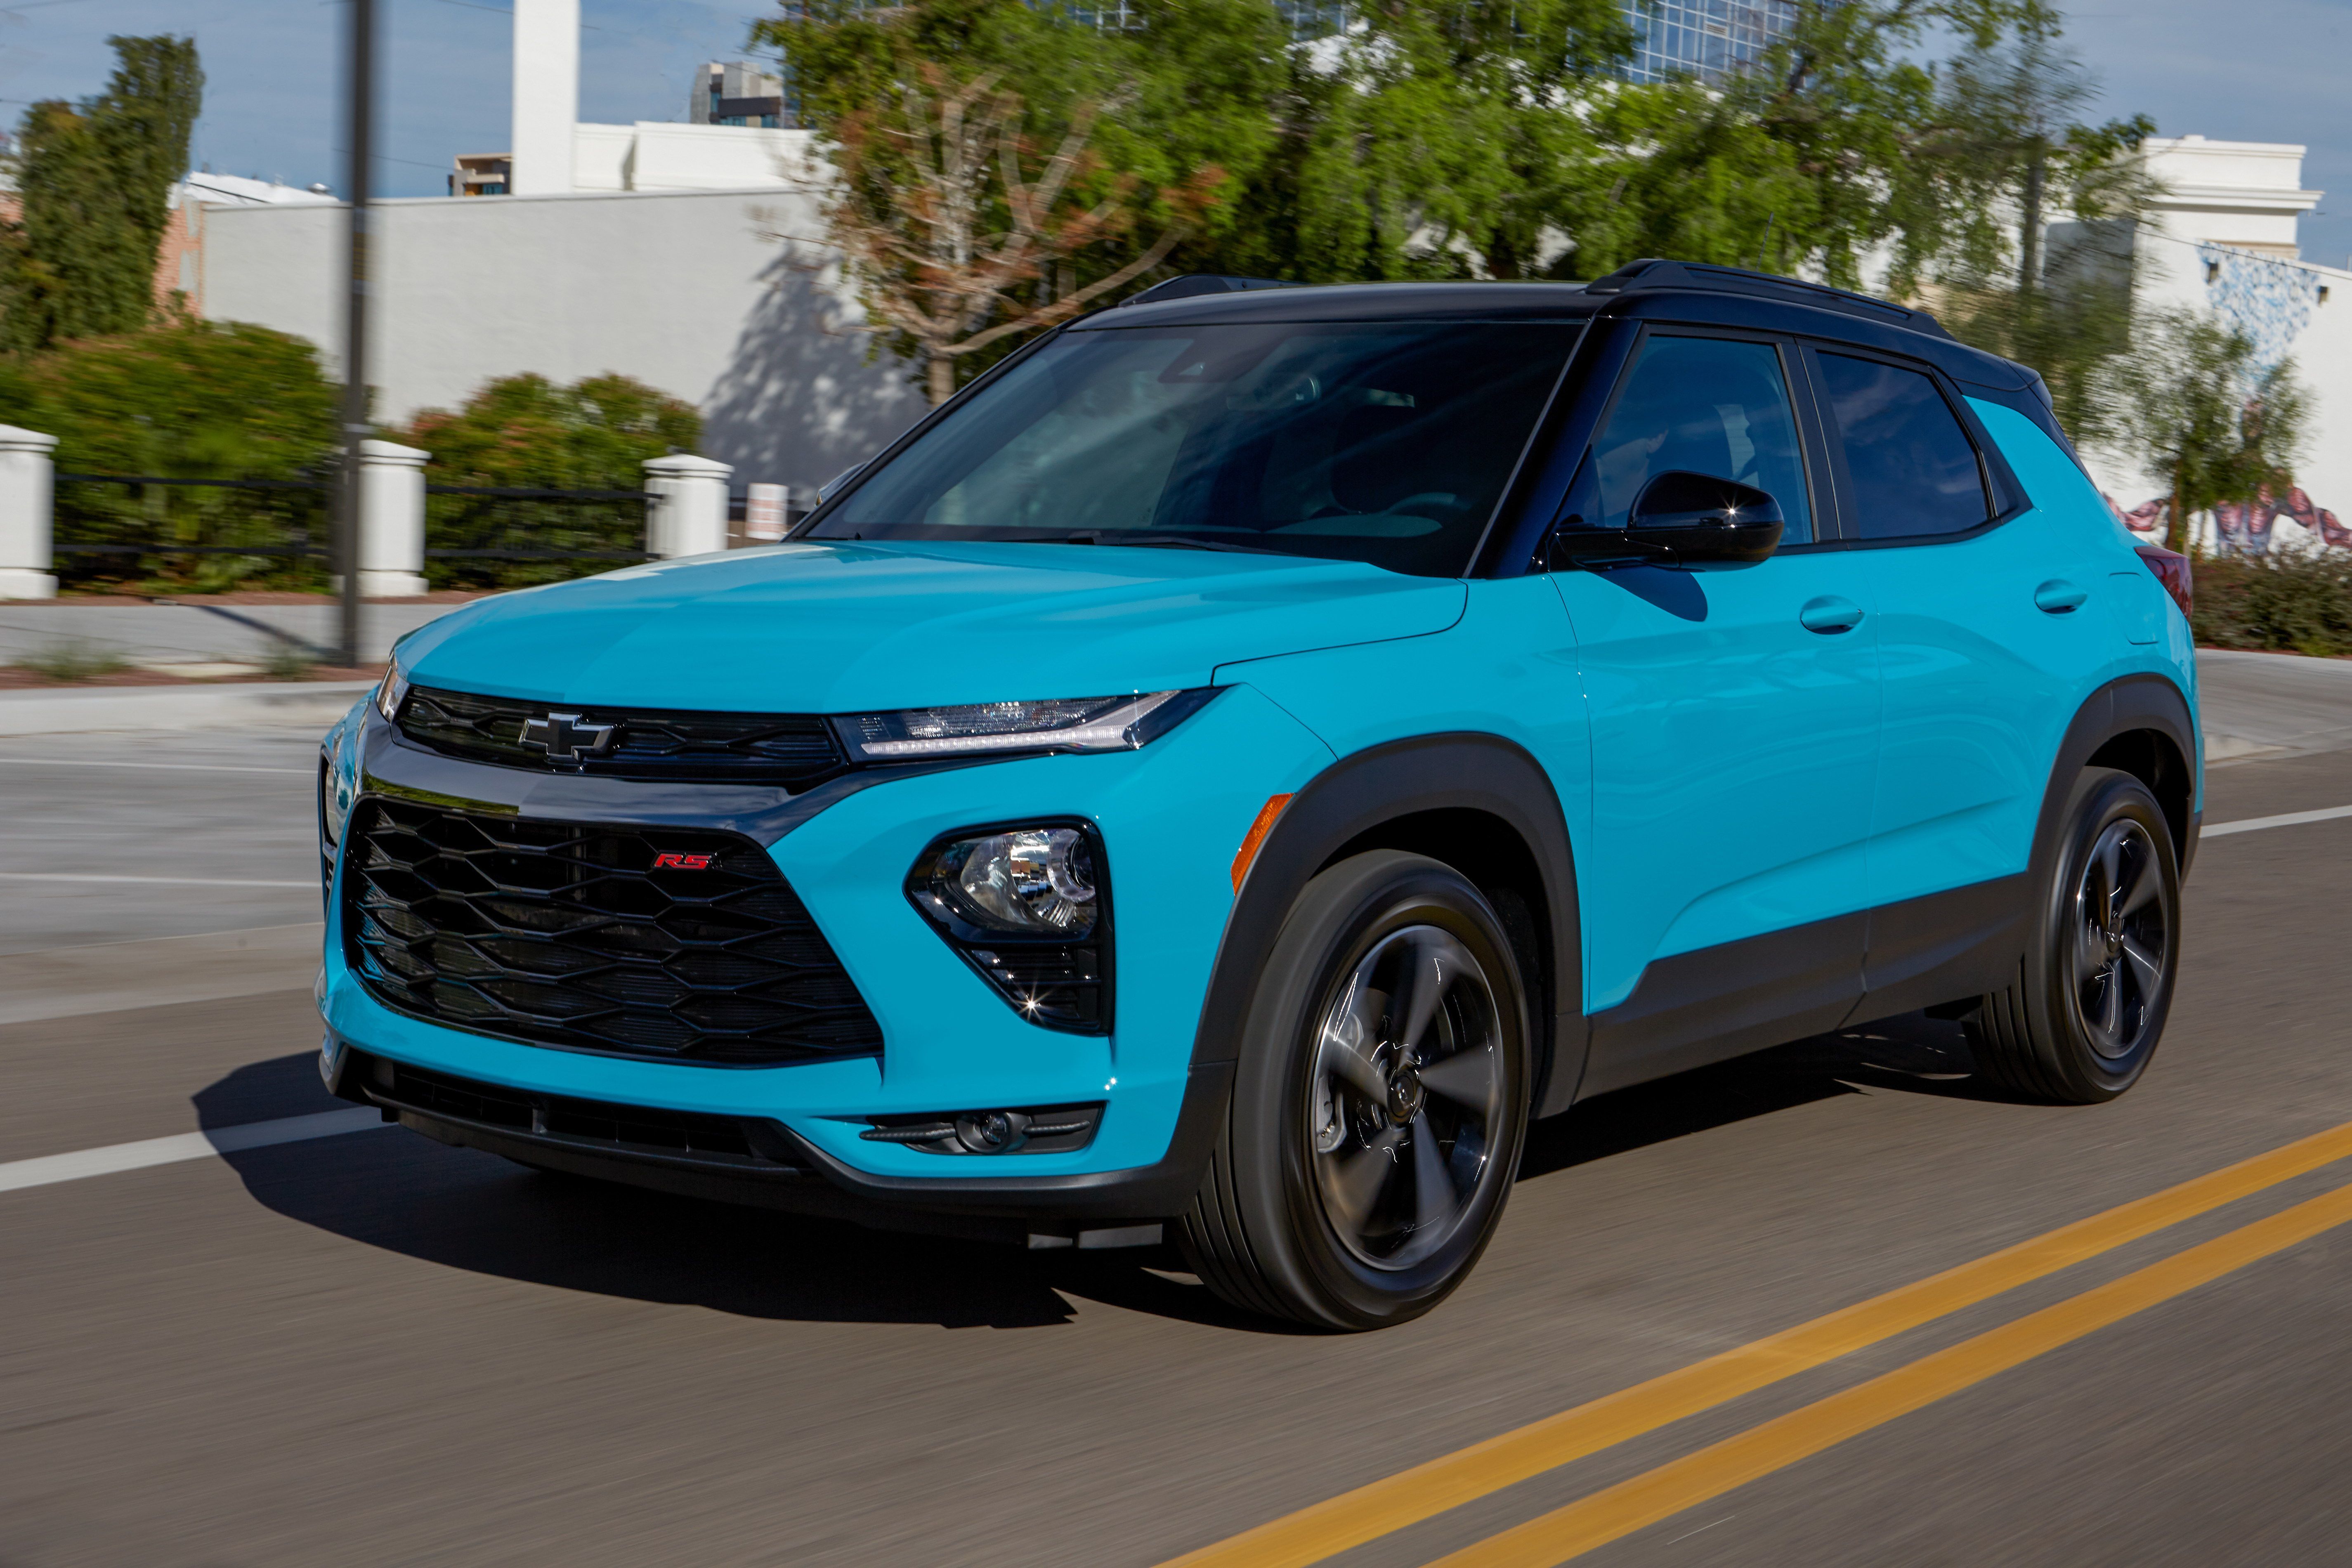 Car review: 2021 Chevy Trailblazer: Bigger than you think, slow as you'd  expect